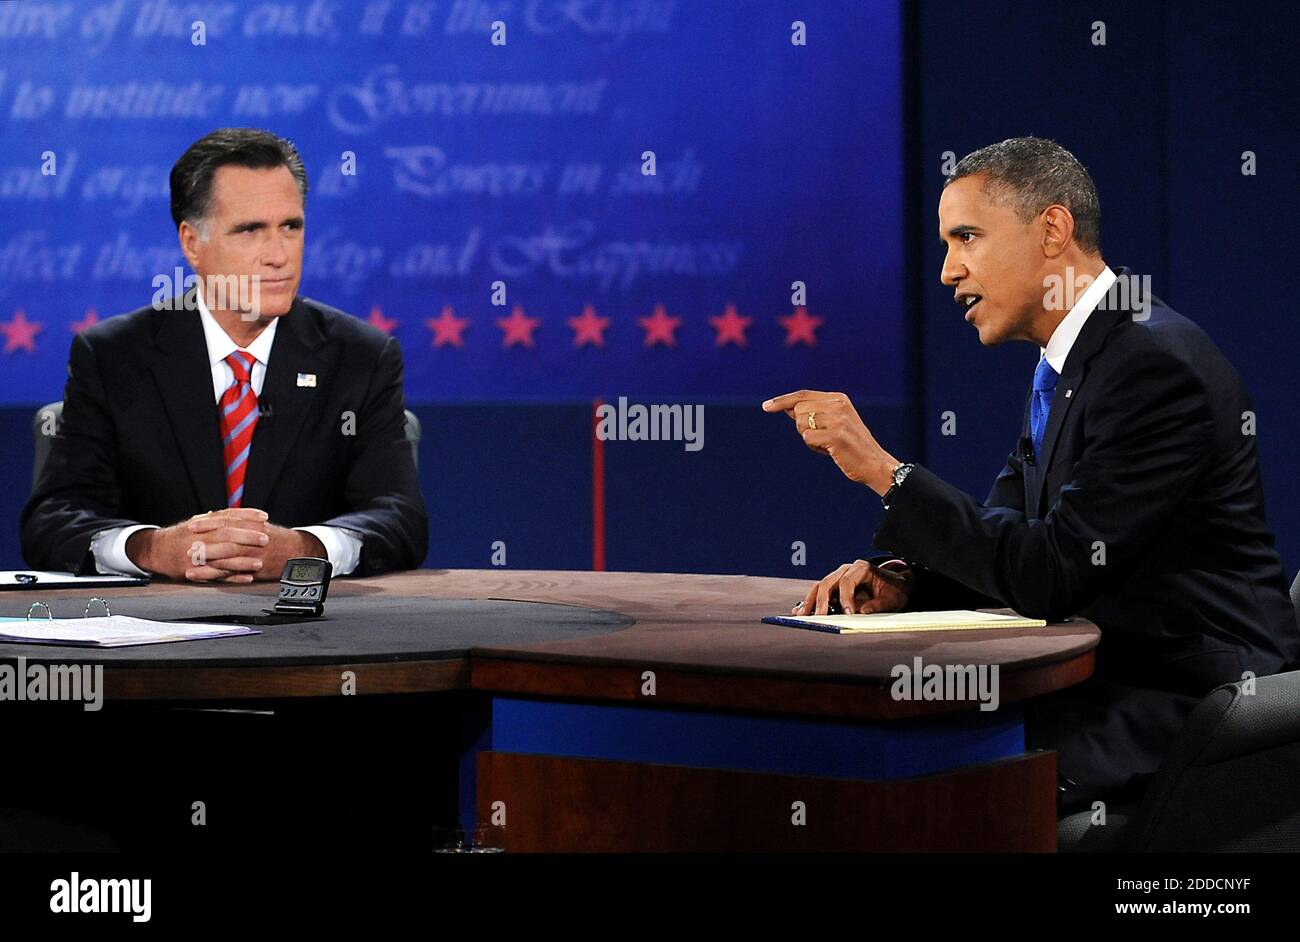 NO FILM, NO VIDEO, NO TV, NO DOCUMENTARY - President Barack Obama, right, speaks during a debate with Republican presidential candidate Mitt Romney, left, at Lynn University in Boca Raton, Florida, USA, on Monday, October 22, 2012. Bob Schieffer is the moderator. Photo by Robert Duyos/Sun Sentinel/MCT/ABACAPRESS.COM Stock Photo